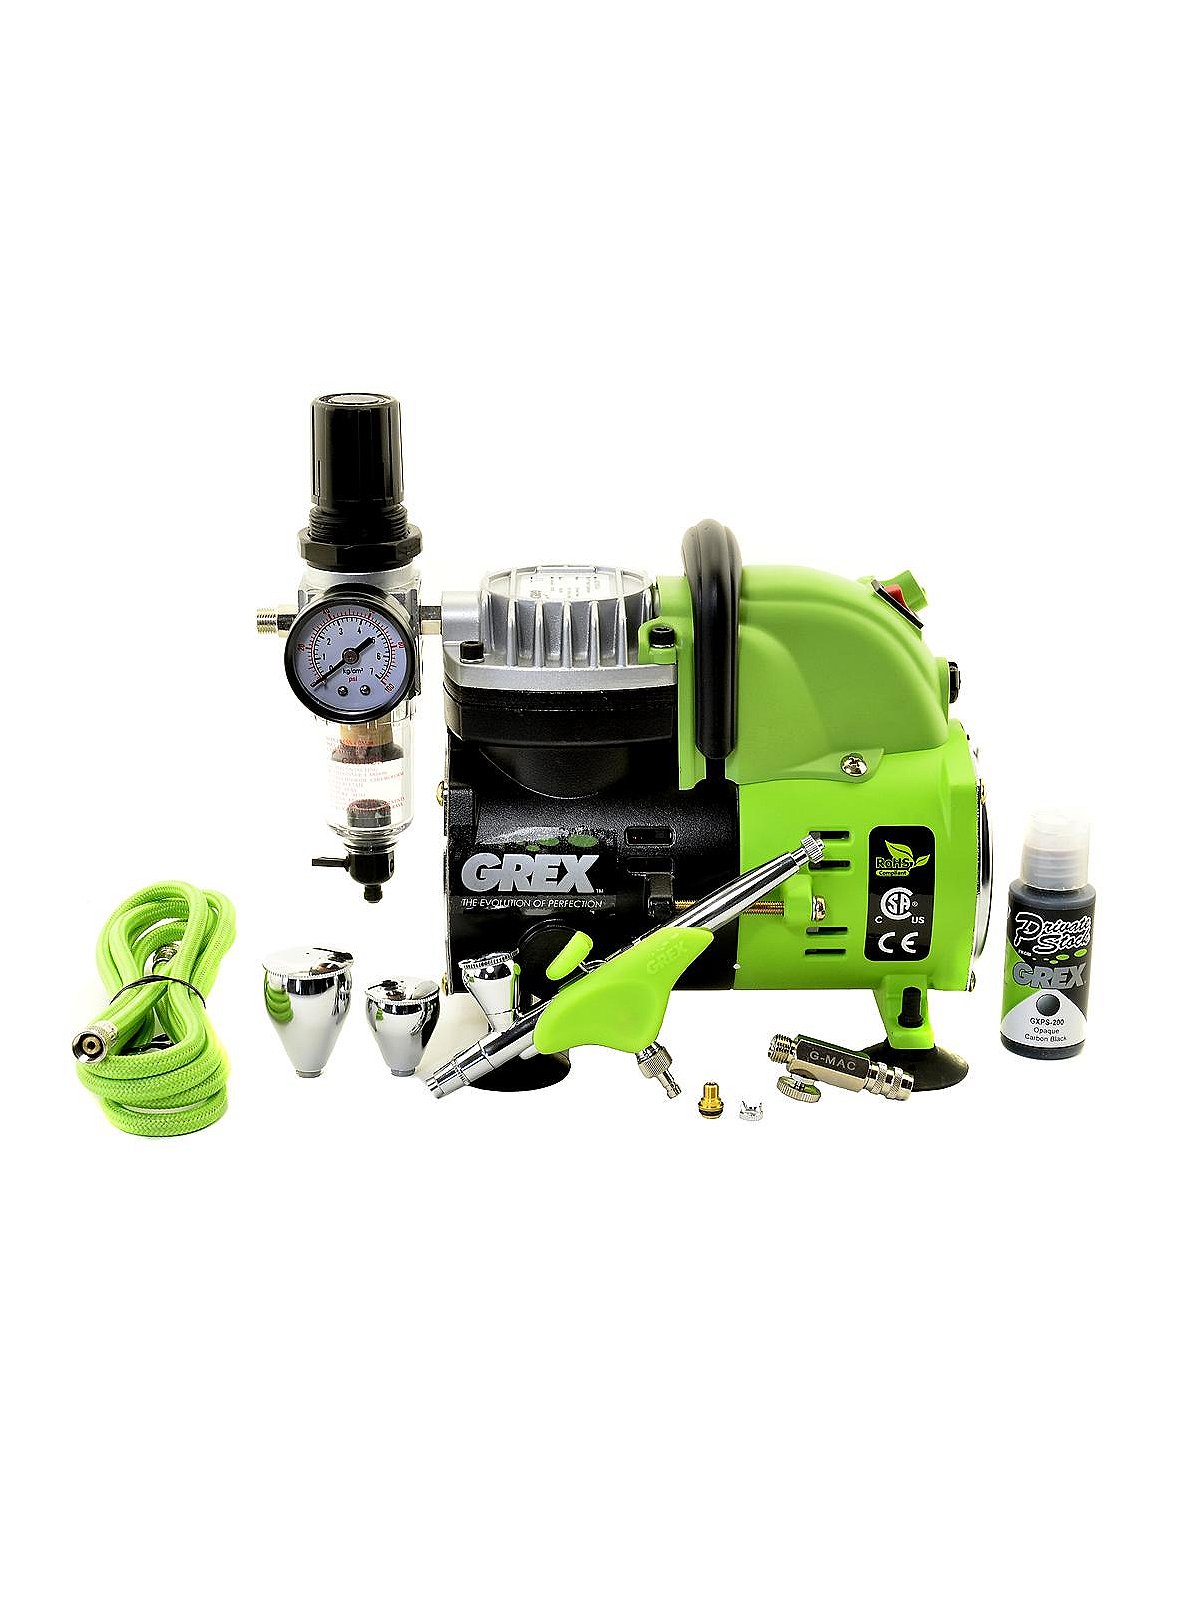 Grex GCK03 Tritium.TG Airbrush Combo Kit with Tritium.TG Airbrush, AC1 –  Pete's Arts, Crafts and Sewing